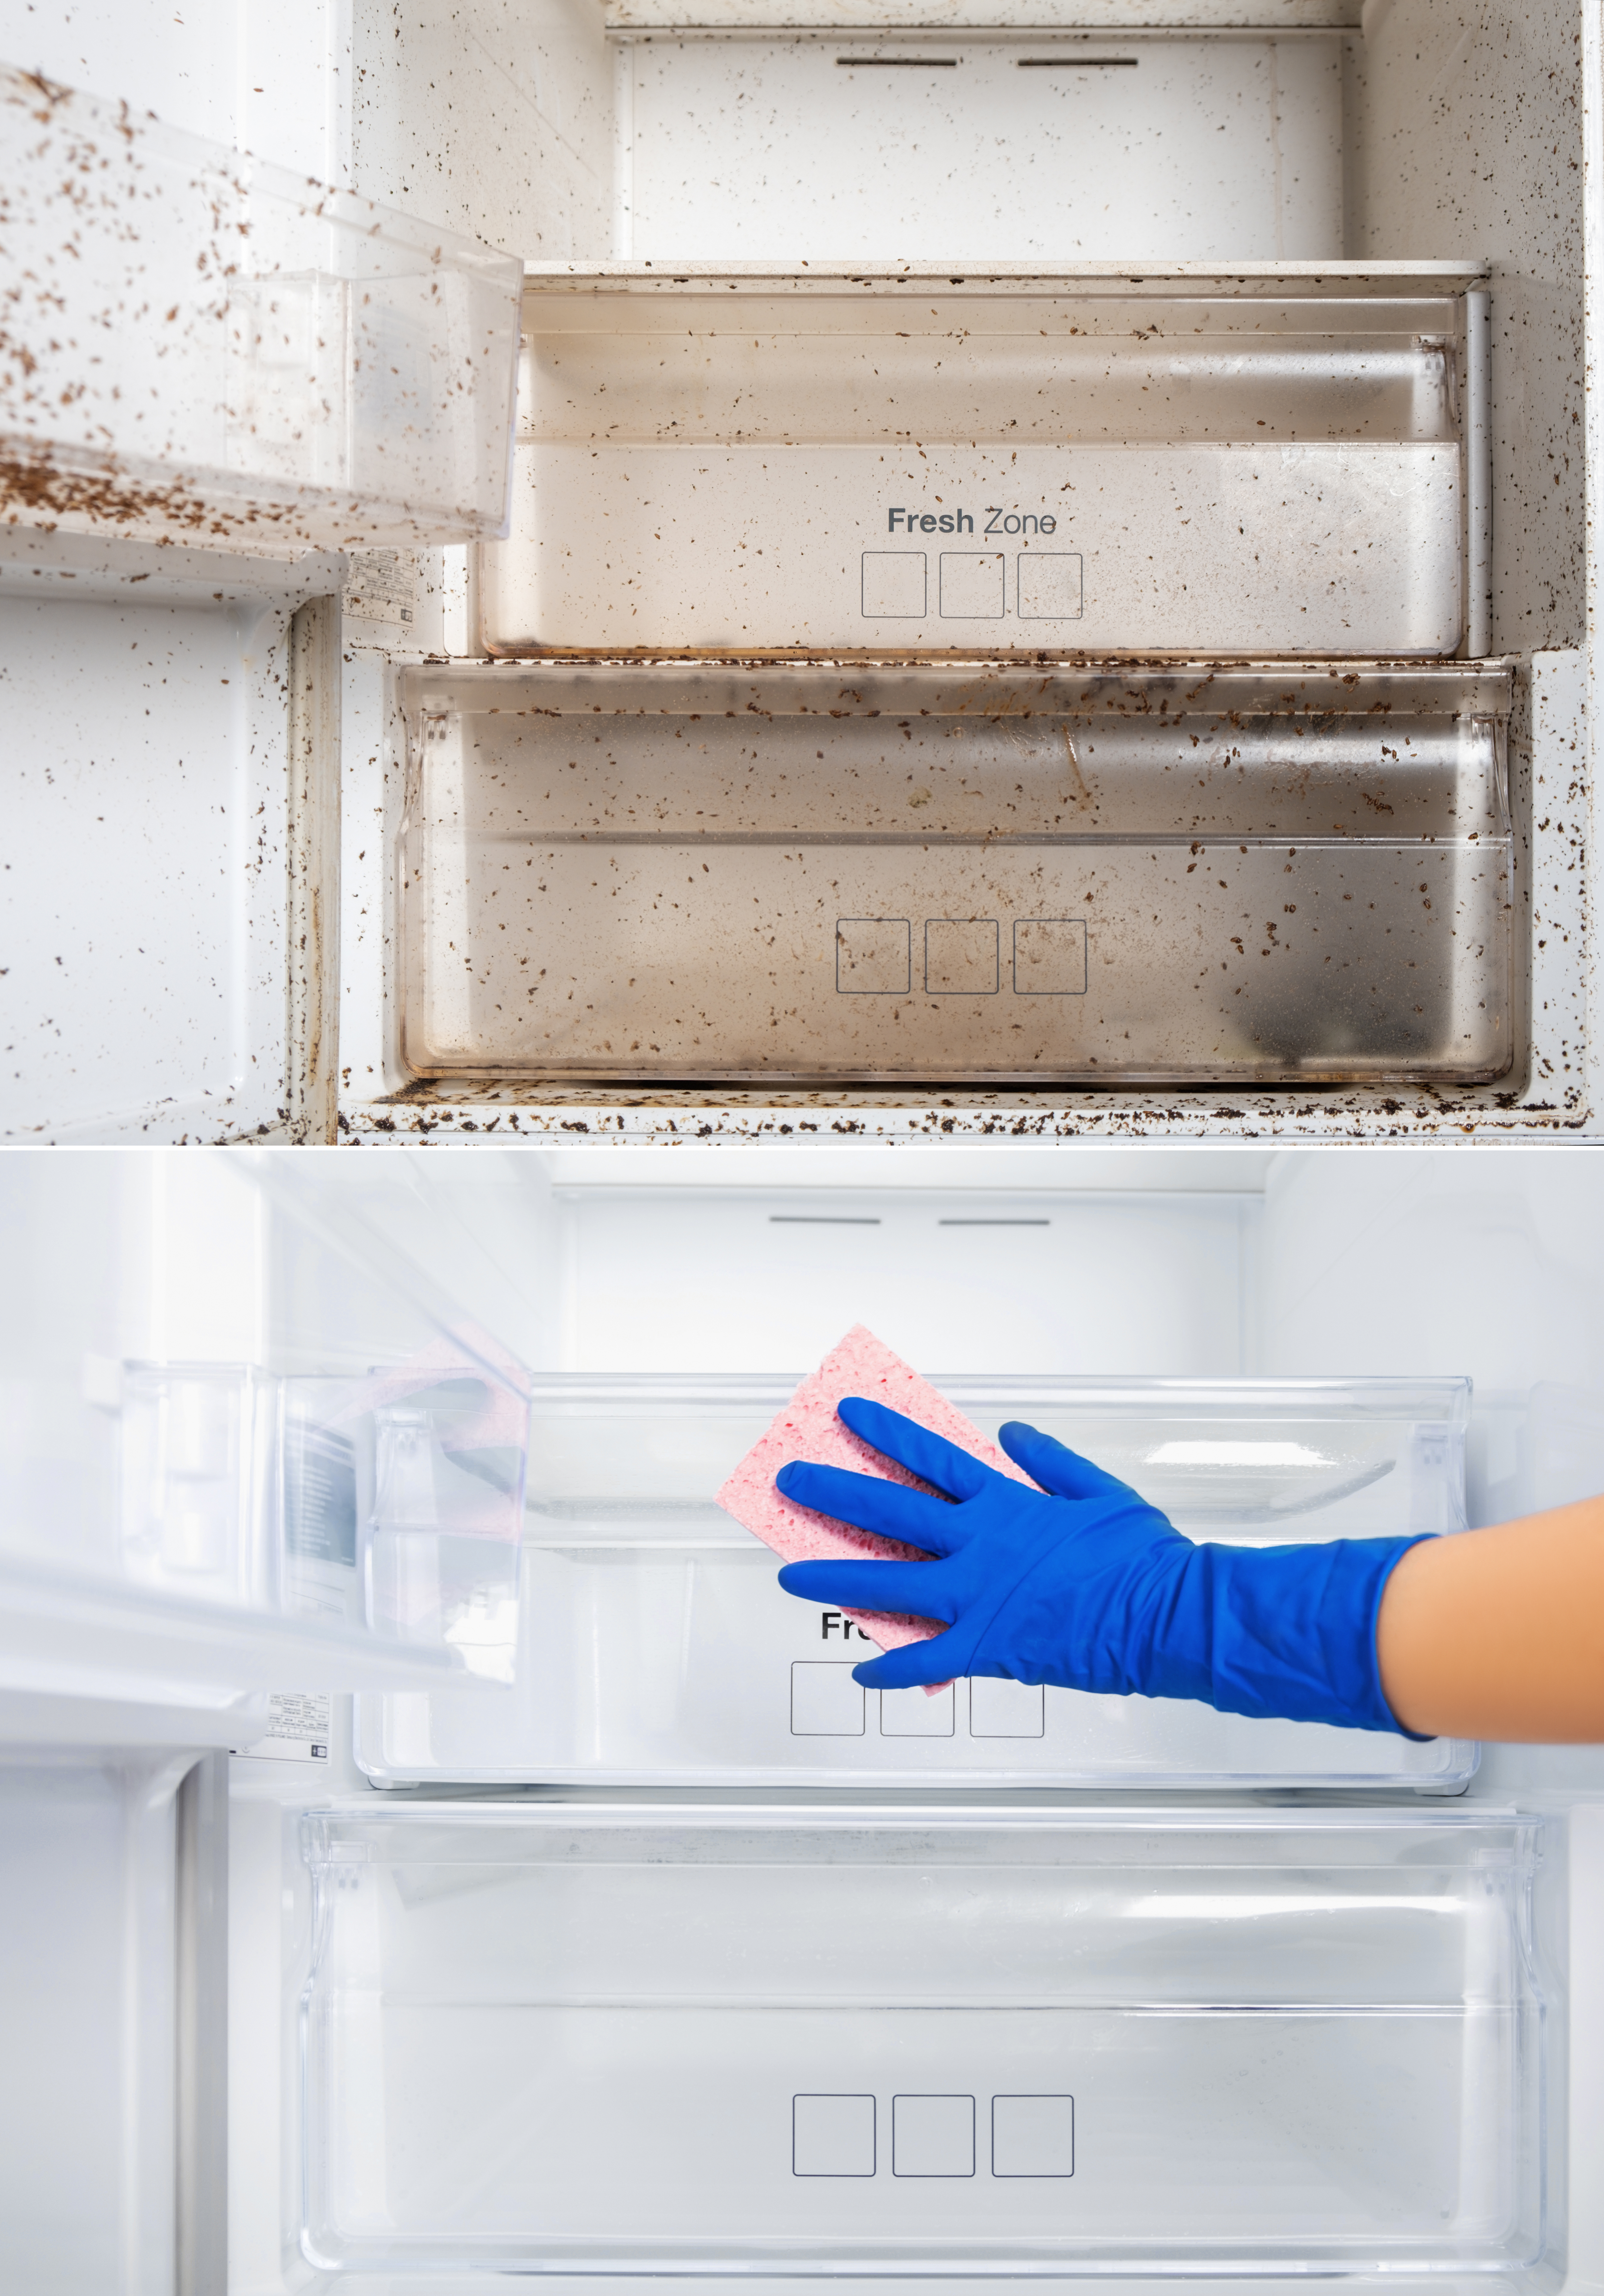 Befor-after female hand washes the refrigerator shelves. Cleaning service Dirty and clean. Boxes